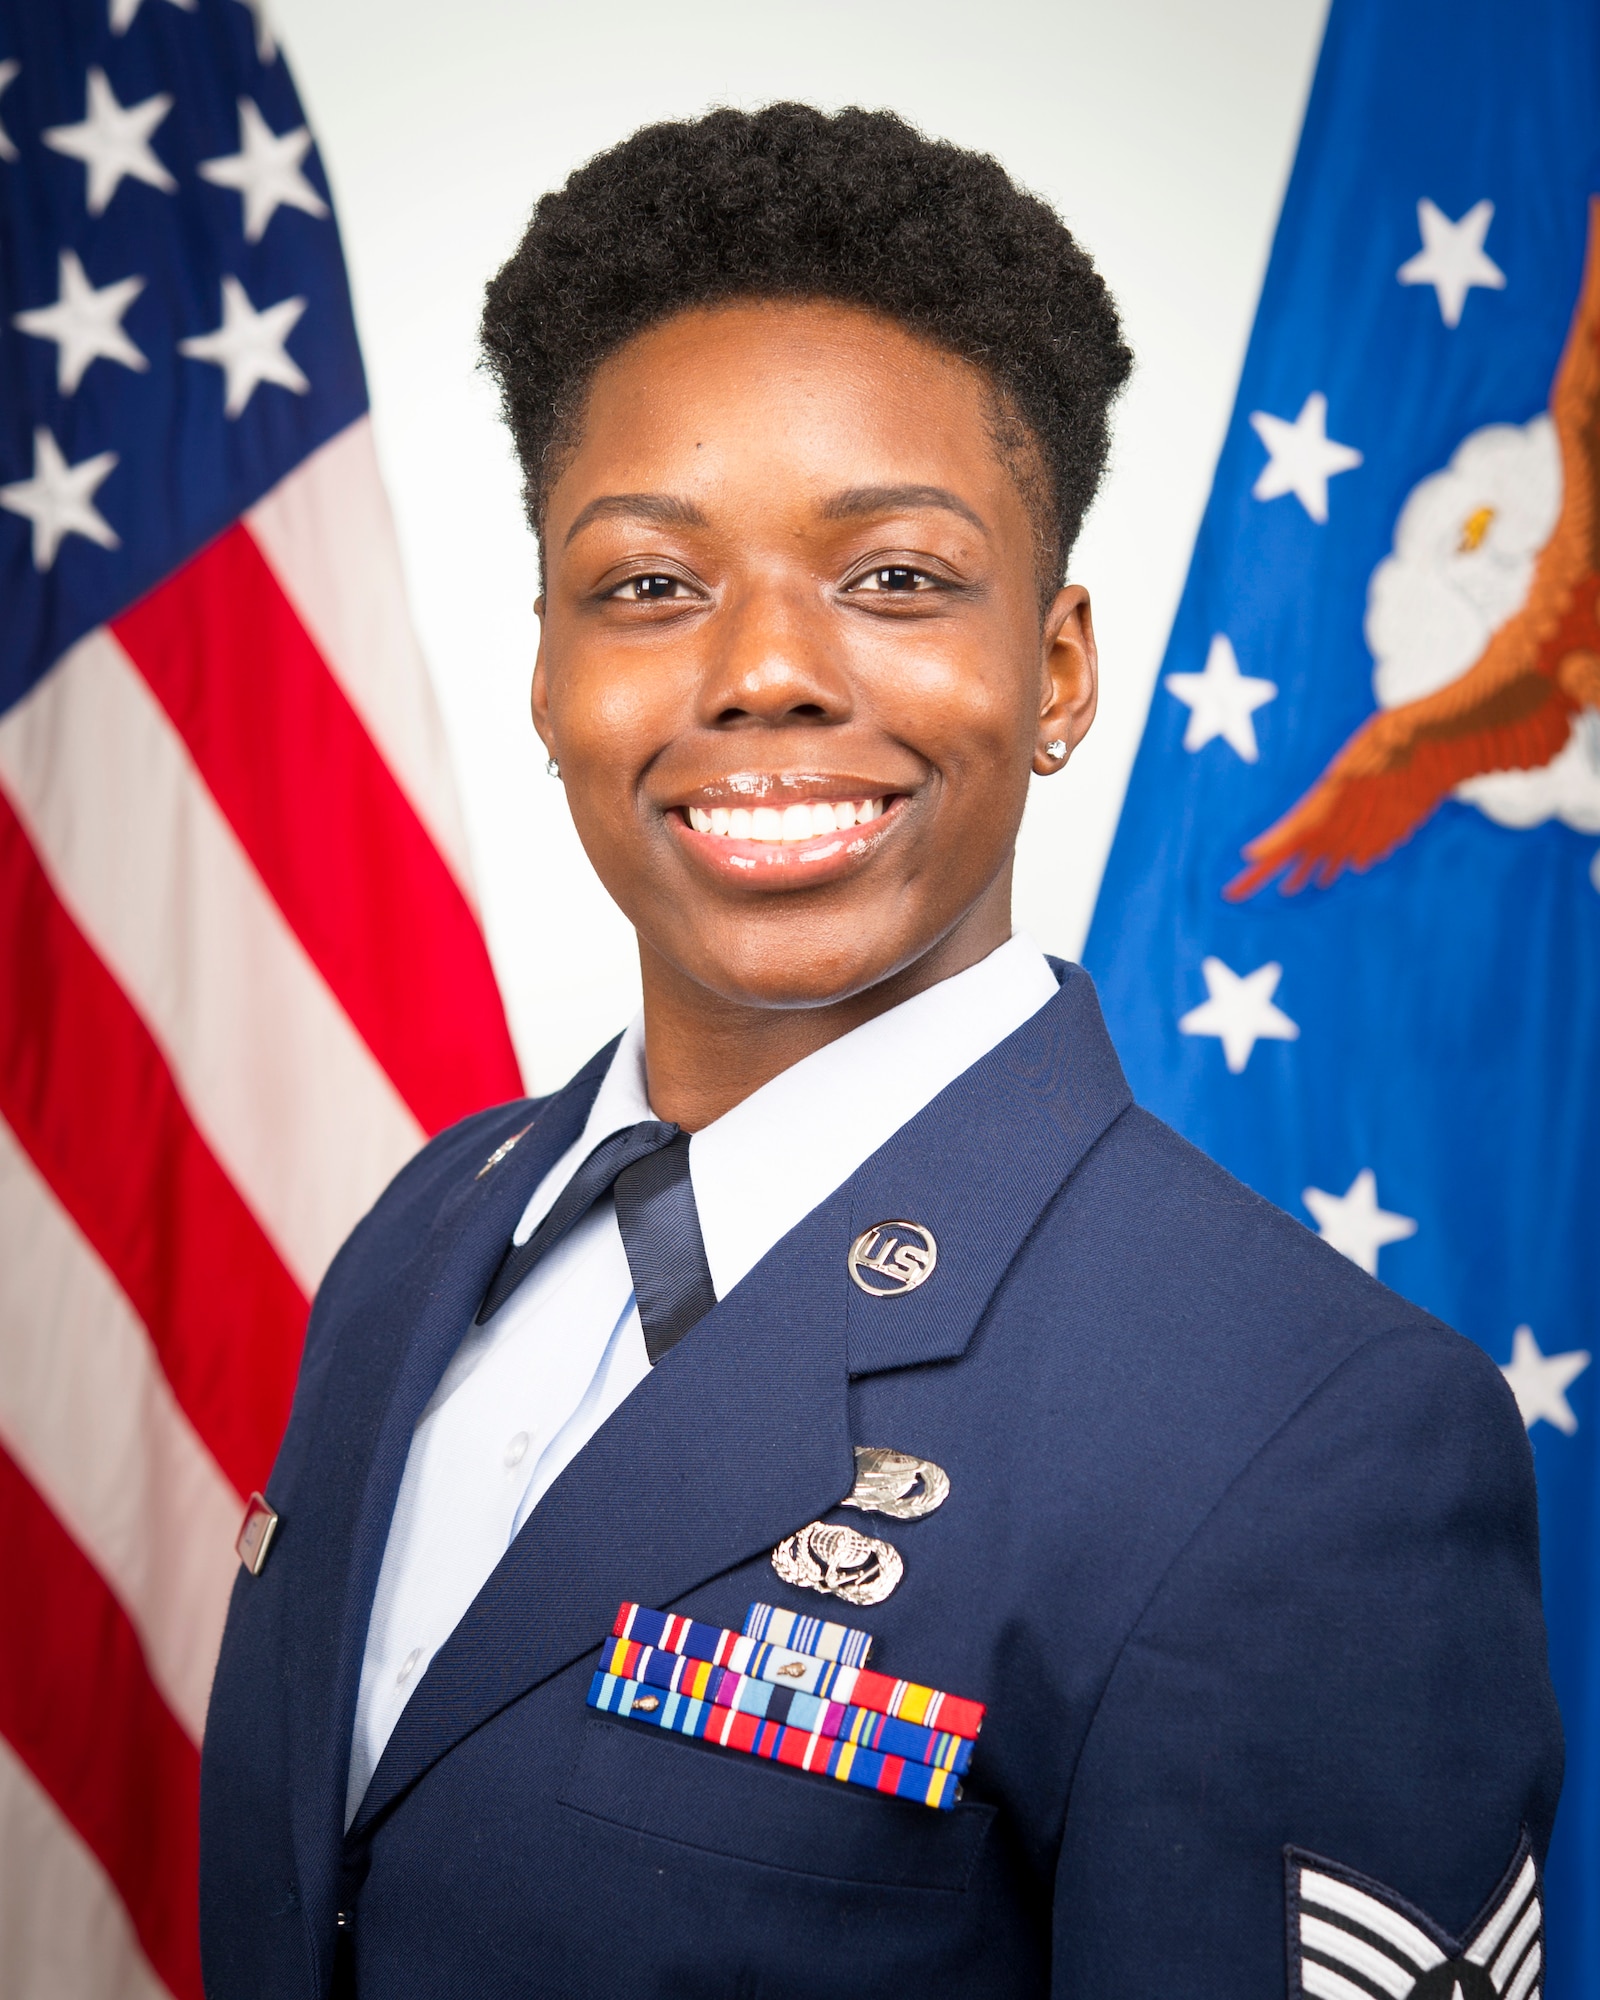 Staff Sgt. Alexis Wilson, 434th Air Refueling Wing development and training flight NCOIC, poses for an official photo at Grissom Air Reserve Base, Ind, July 12, 2020. Wilson was recently selected for the position responsible for preparing Grissom's newest Airmen for basic military training and the military culture. (U.S. Air Force photo/Master Sgt. Ben Mota)